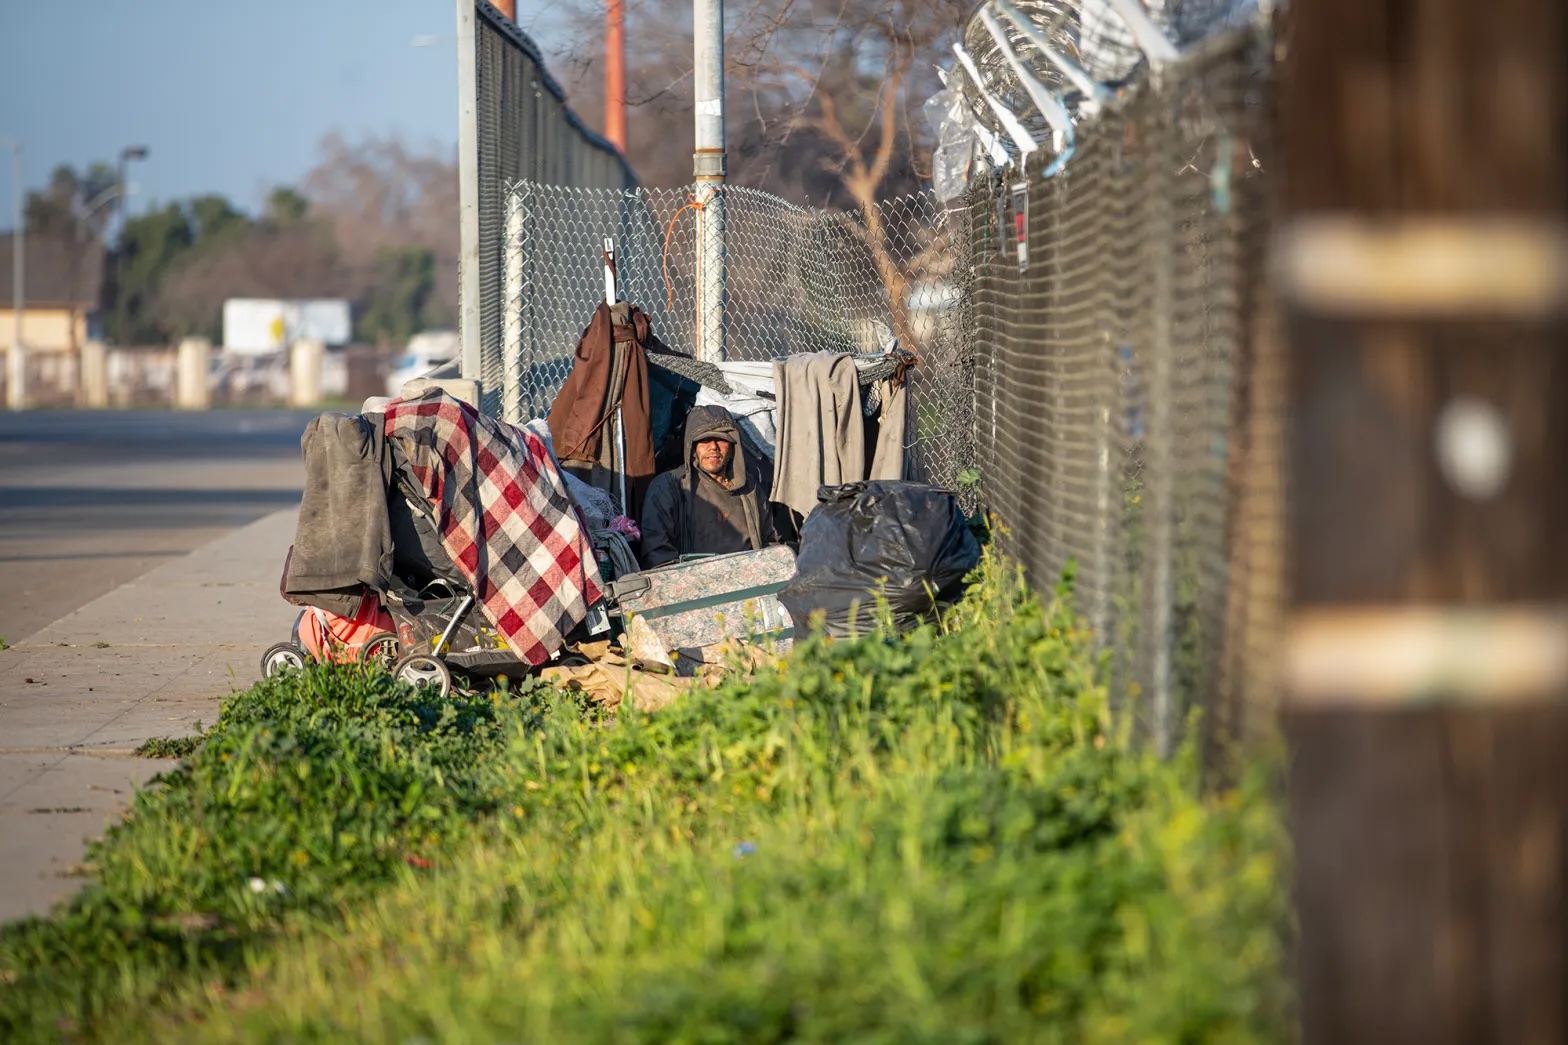 An unhoused person sitting beside a fence with a hoodie pulled over the head and belongings around.